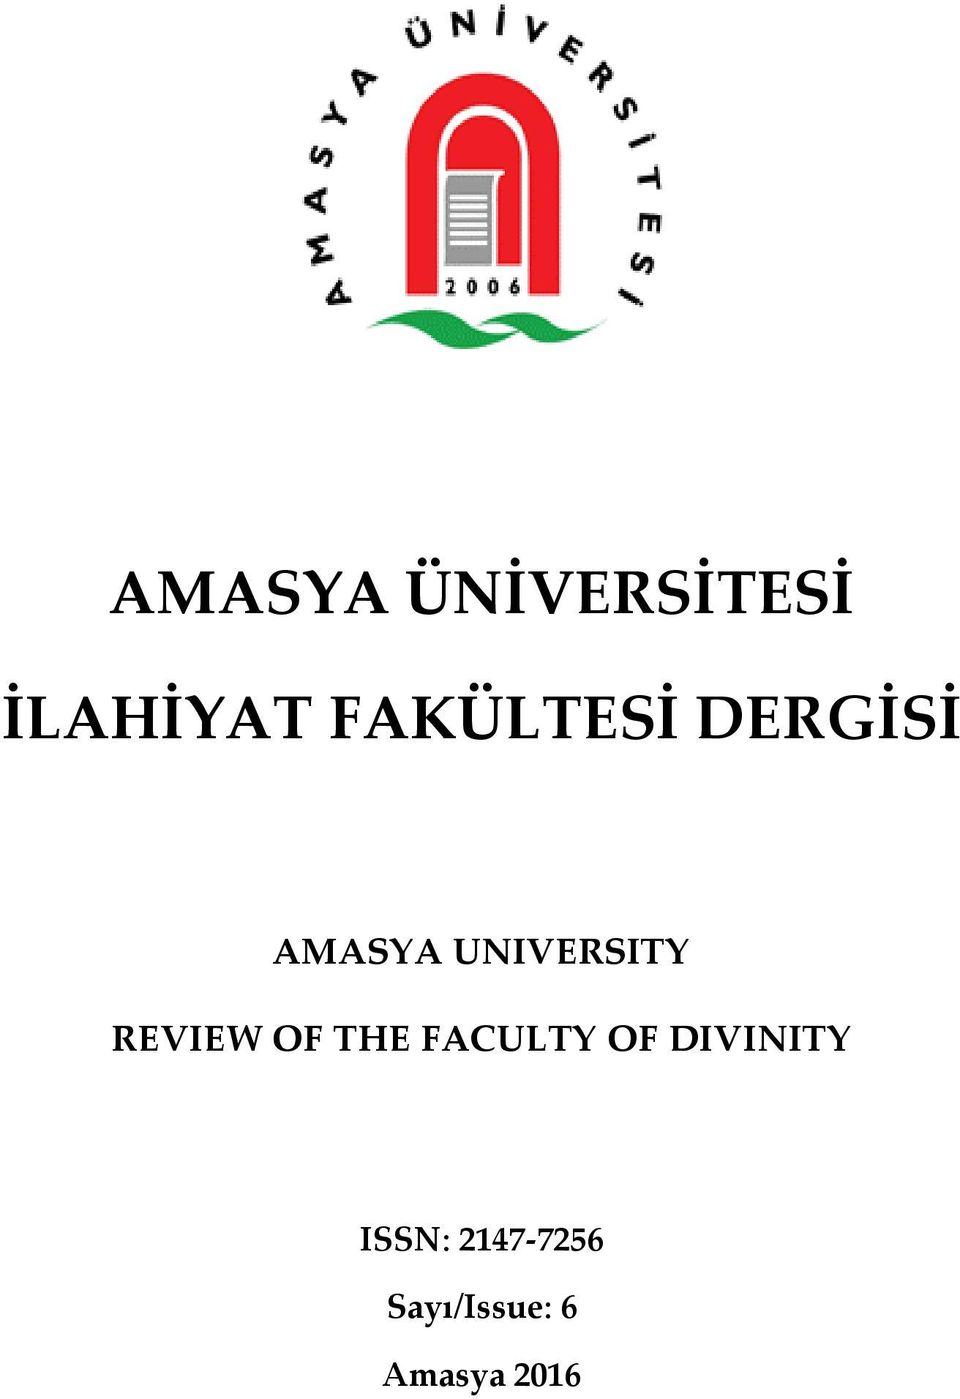 UNIVERSITY REVIEW OF THE